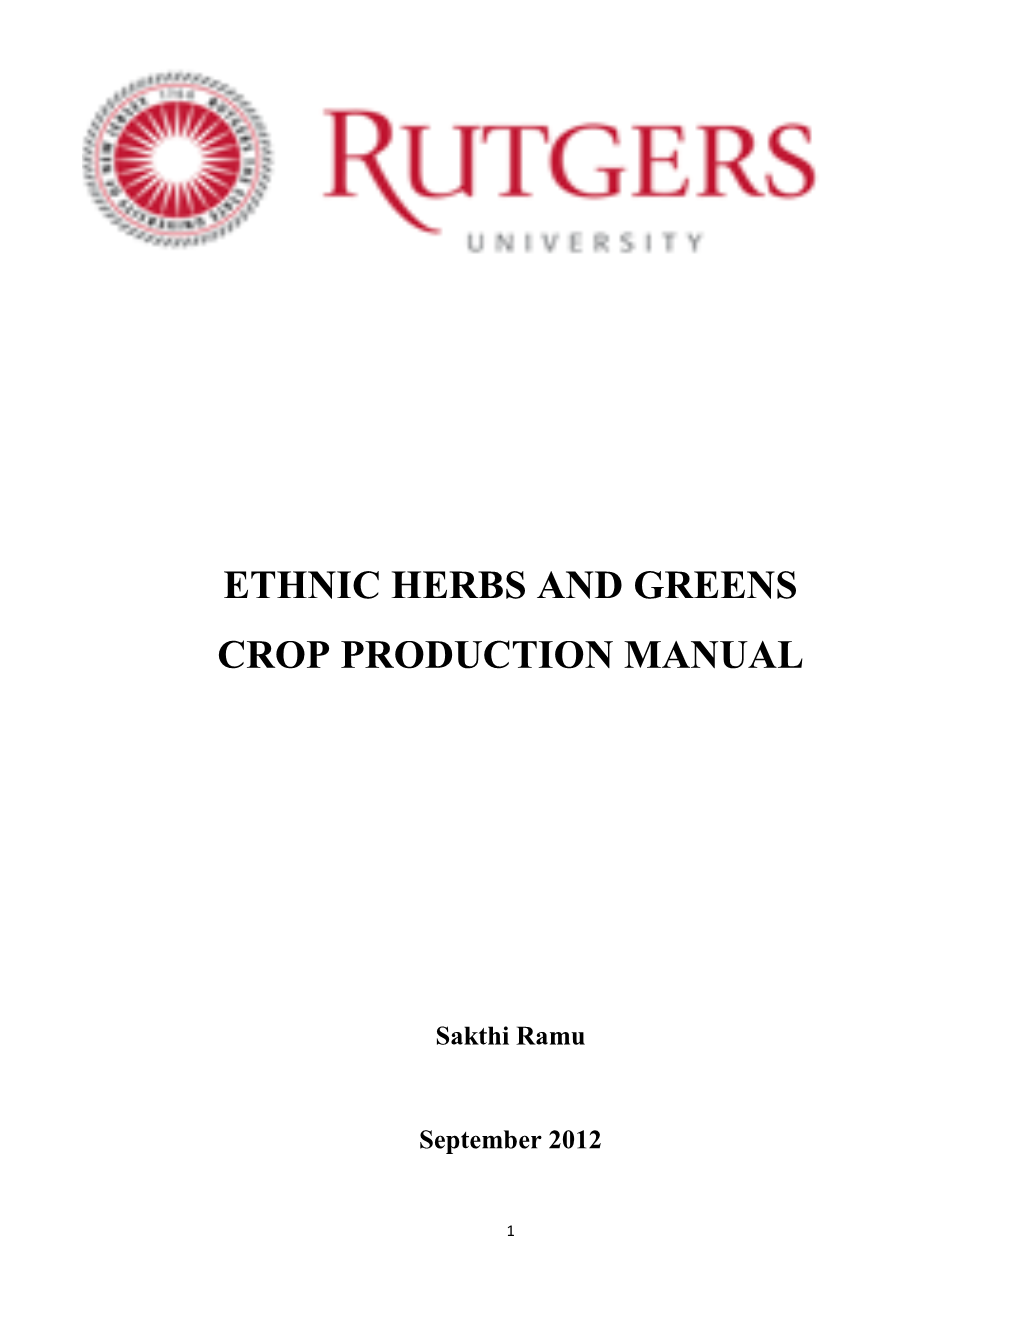 Ethnic Herbs and Greens Crop Production Manual